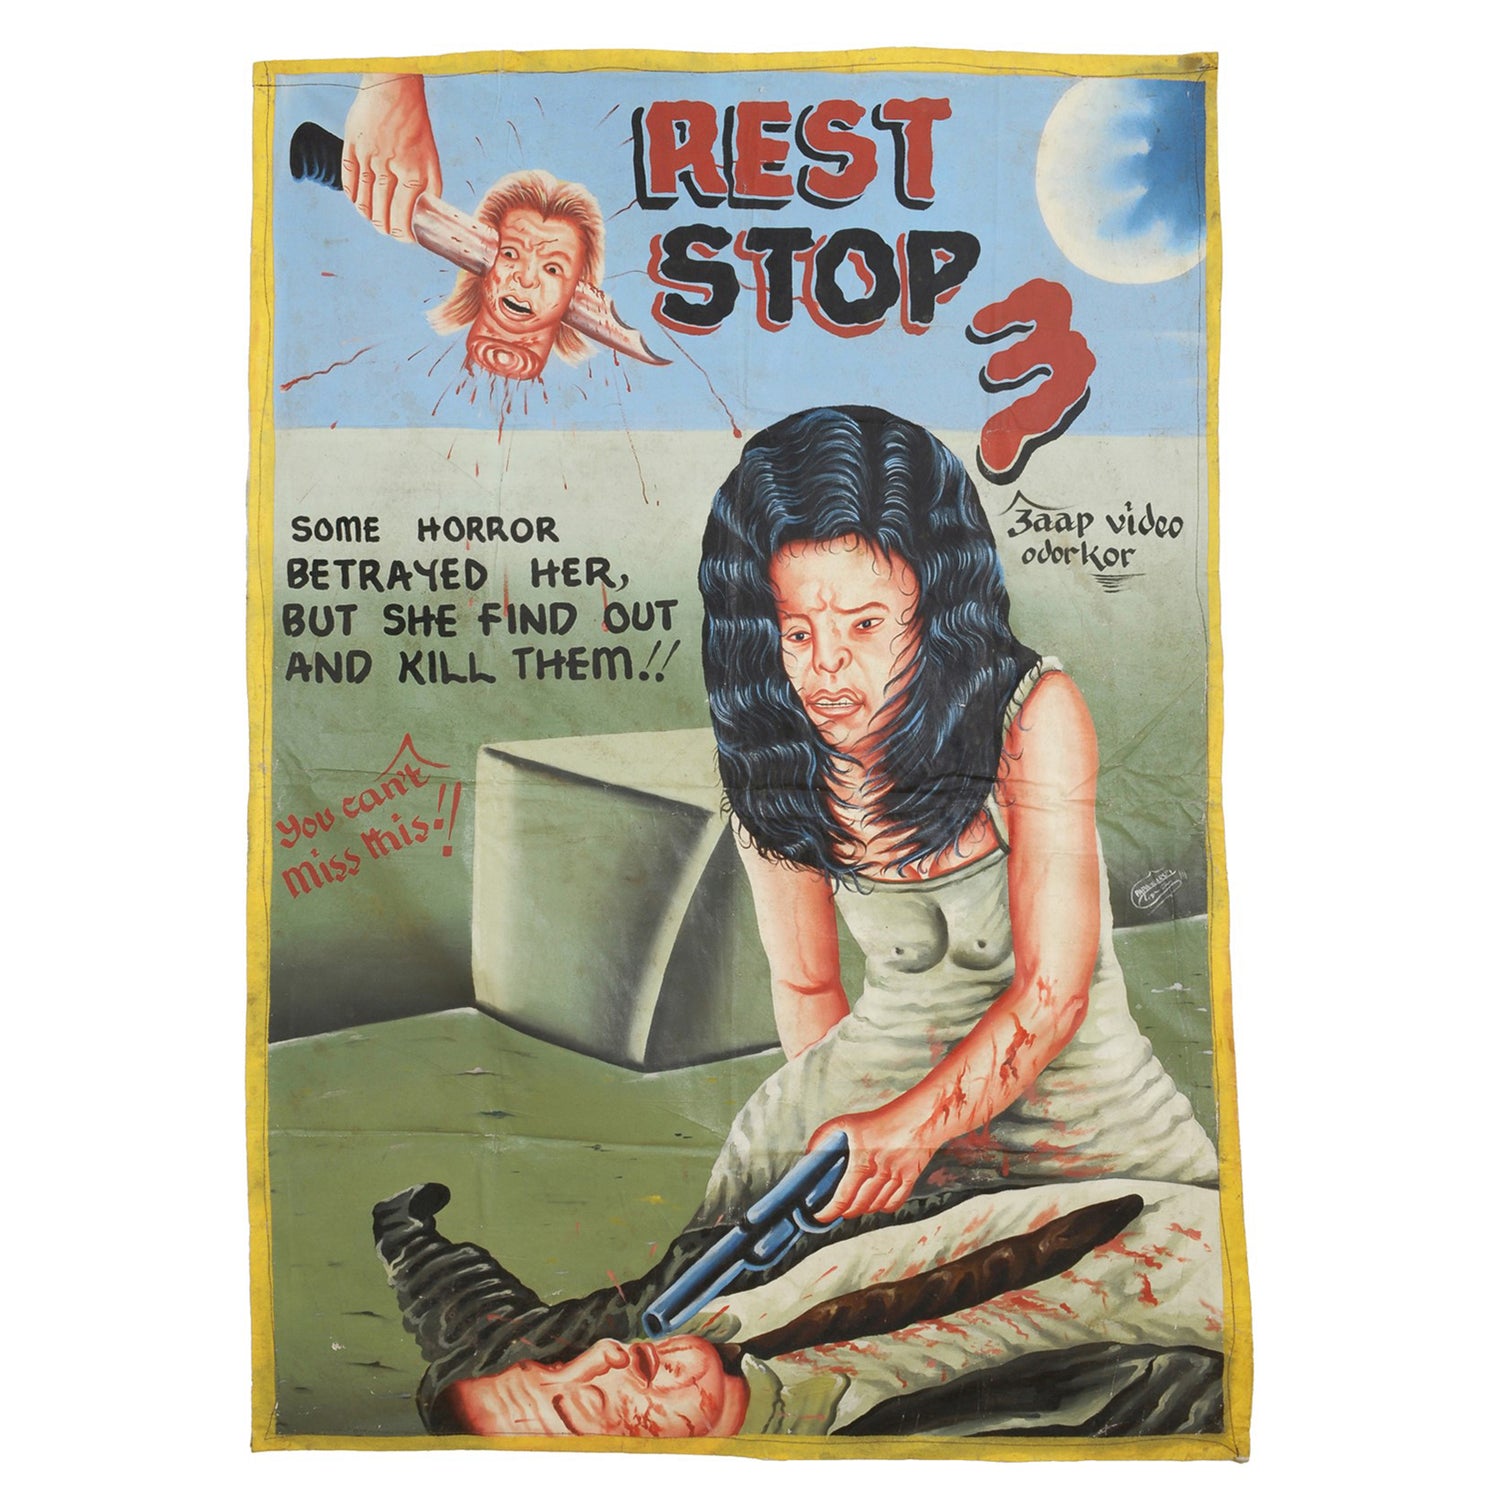 REST STOP 3 MOVIE POSTER HAND PAINTED  IN GHANA FOR OUTSIDER ART